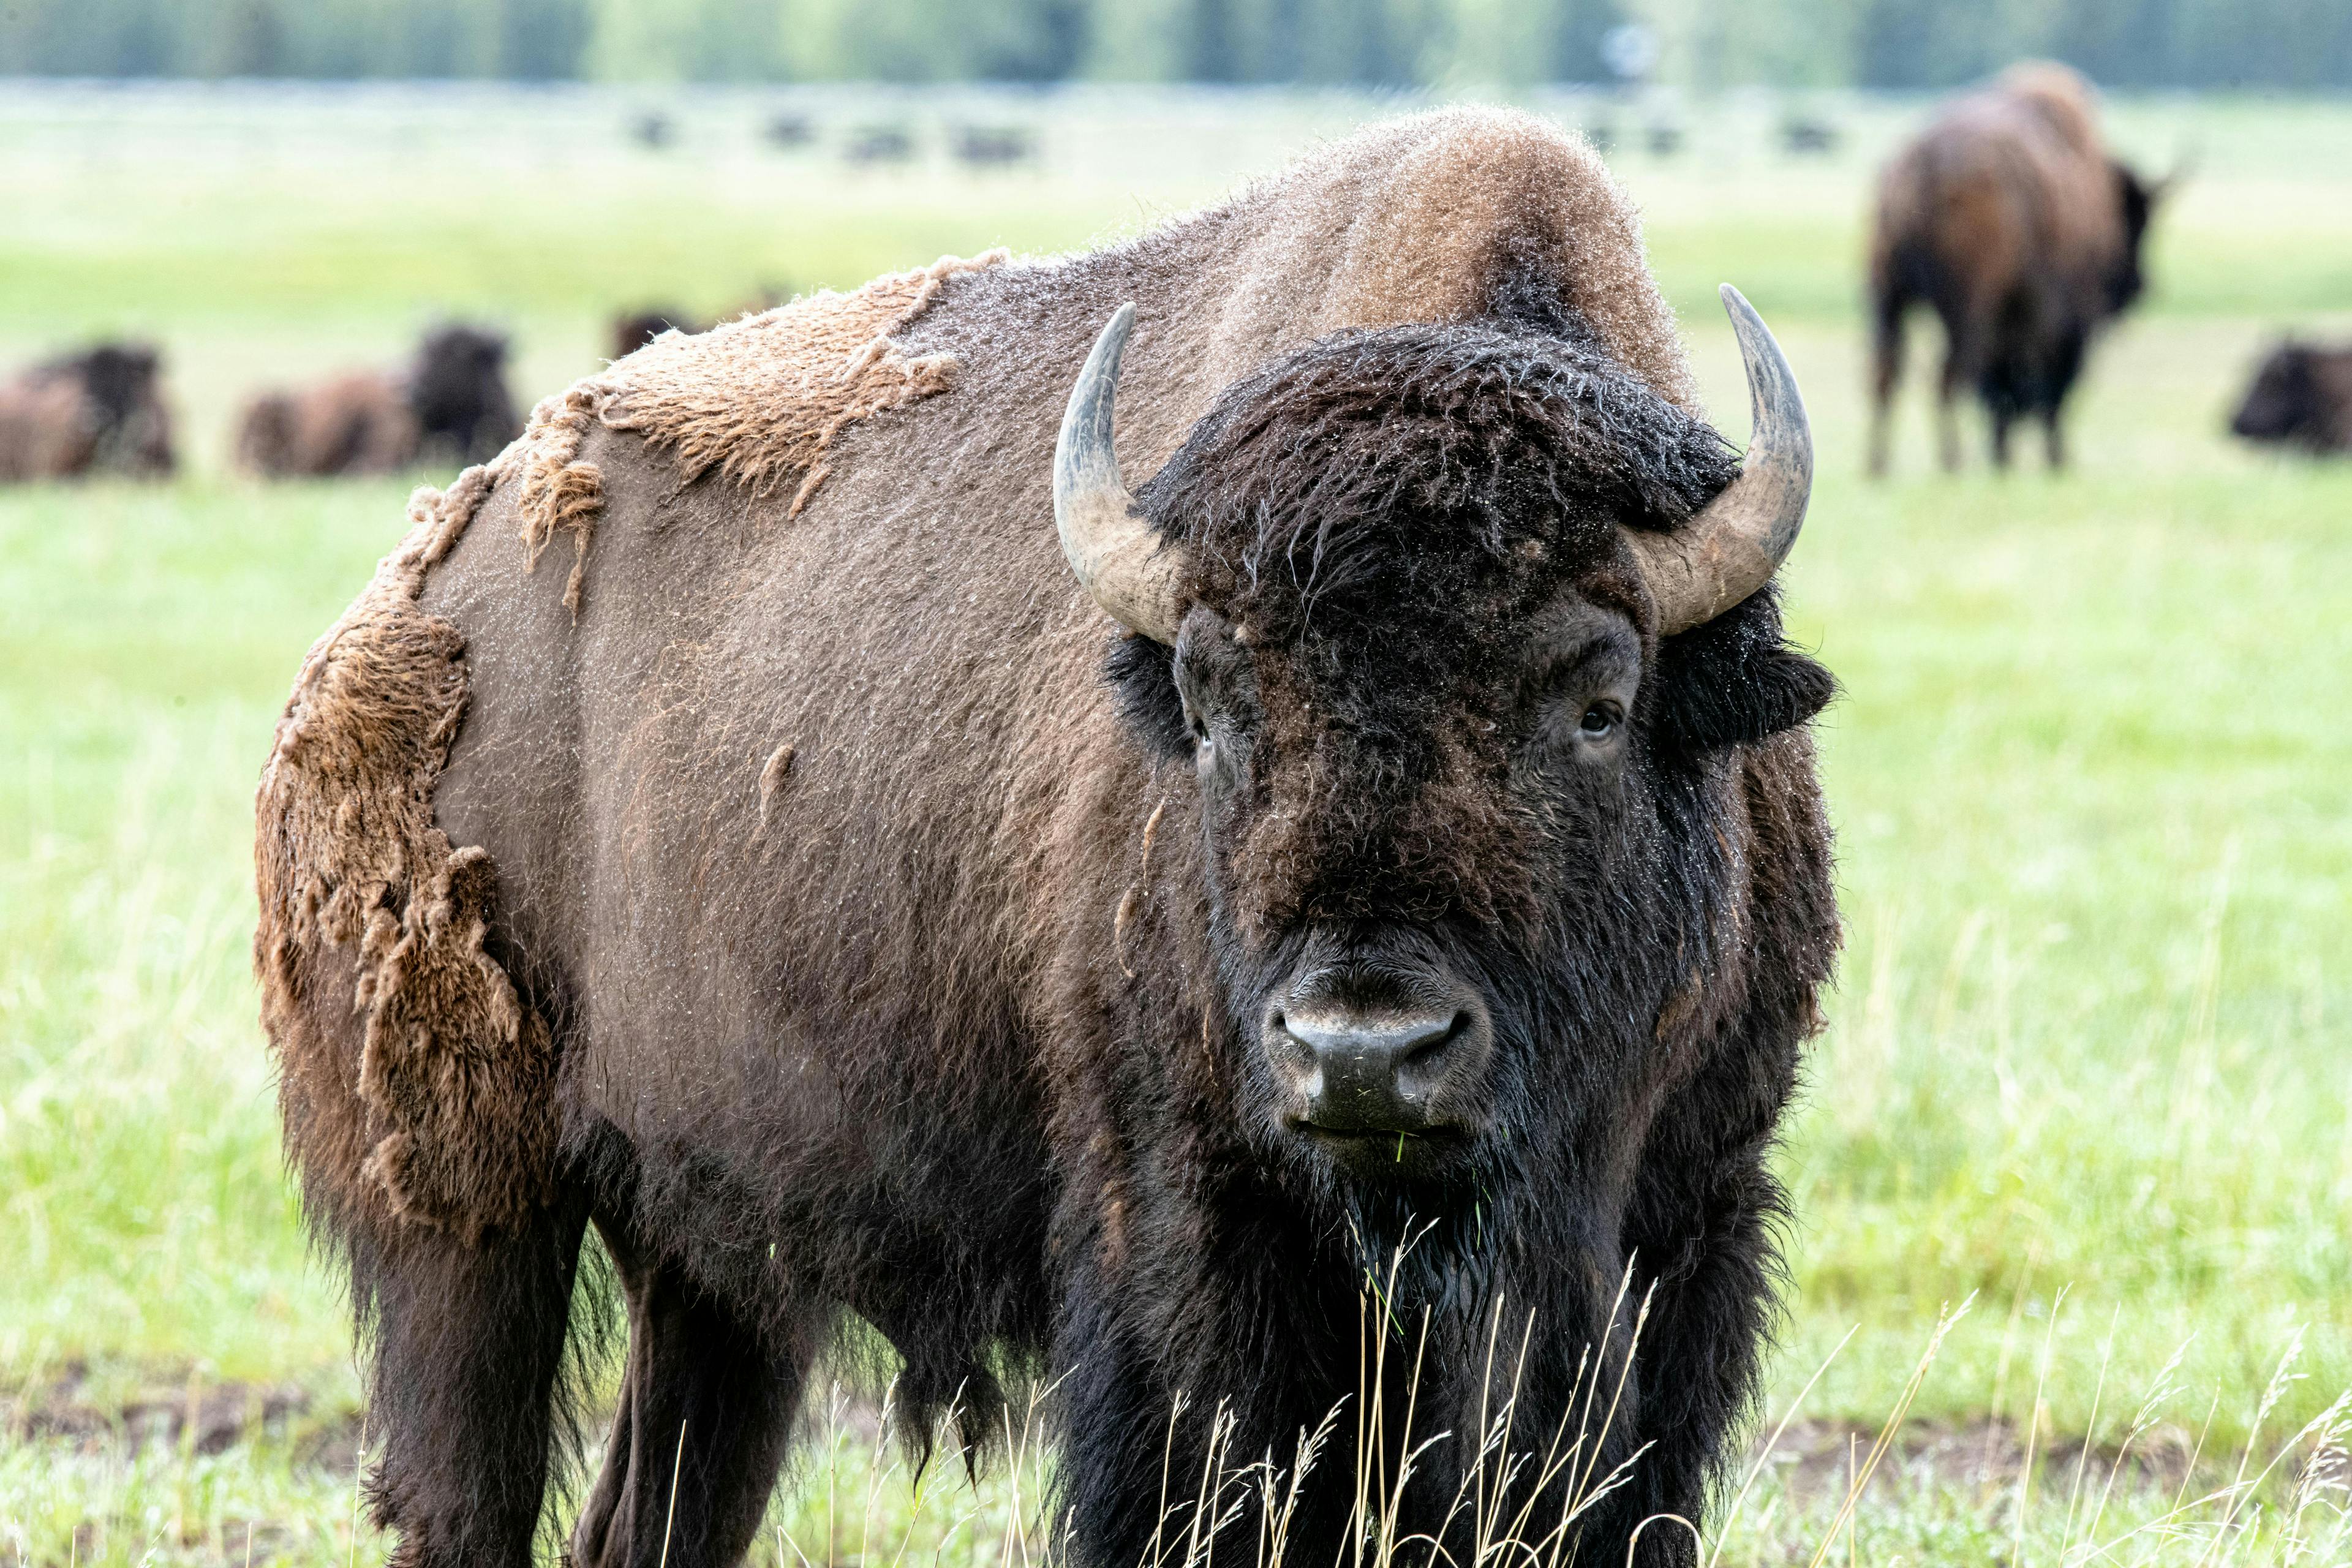 A Bison roams in Yellowstone National Park in Yellowstone Teton Territory.